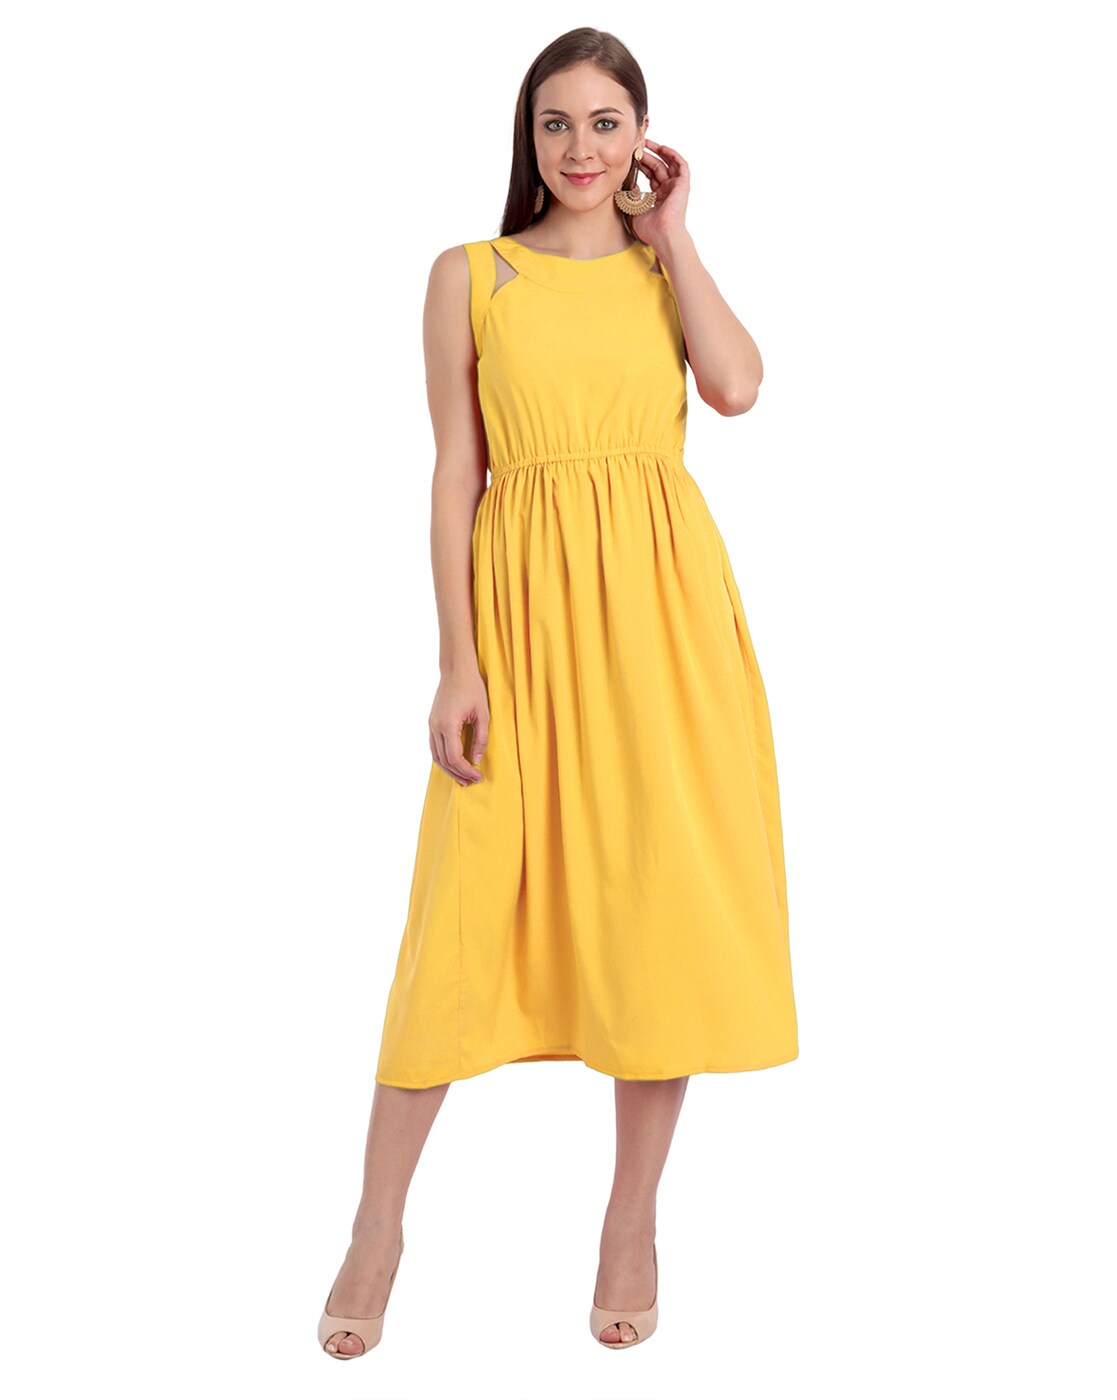 Buy Yellow Floral Print Maxi Dress Online - Aarke India Store View